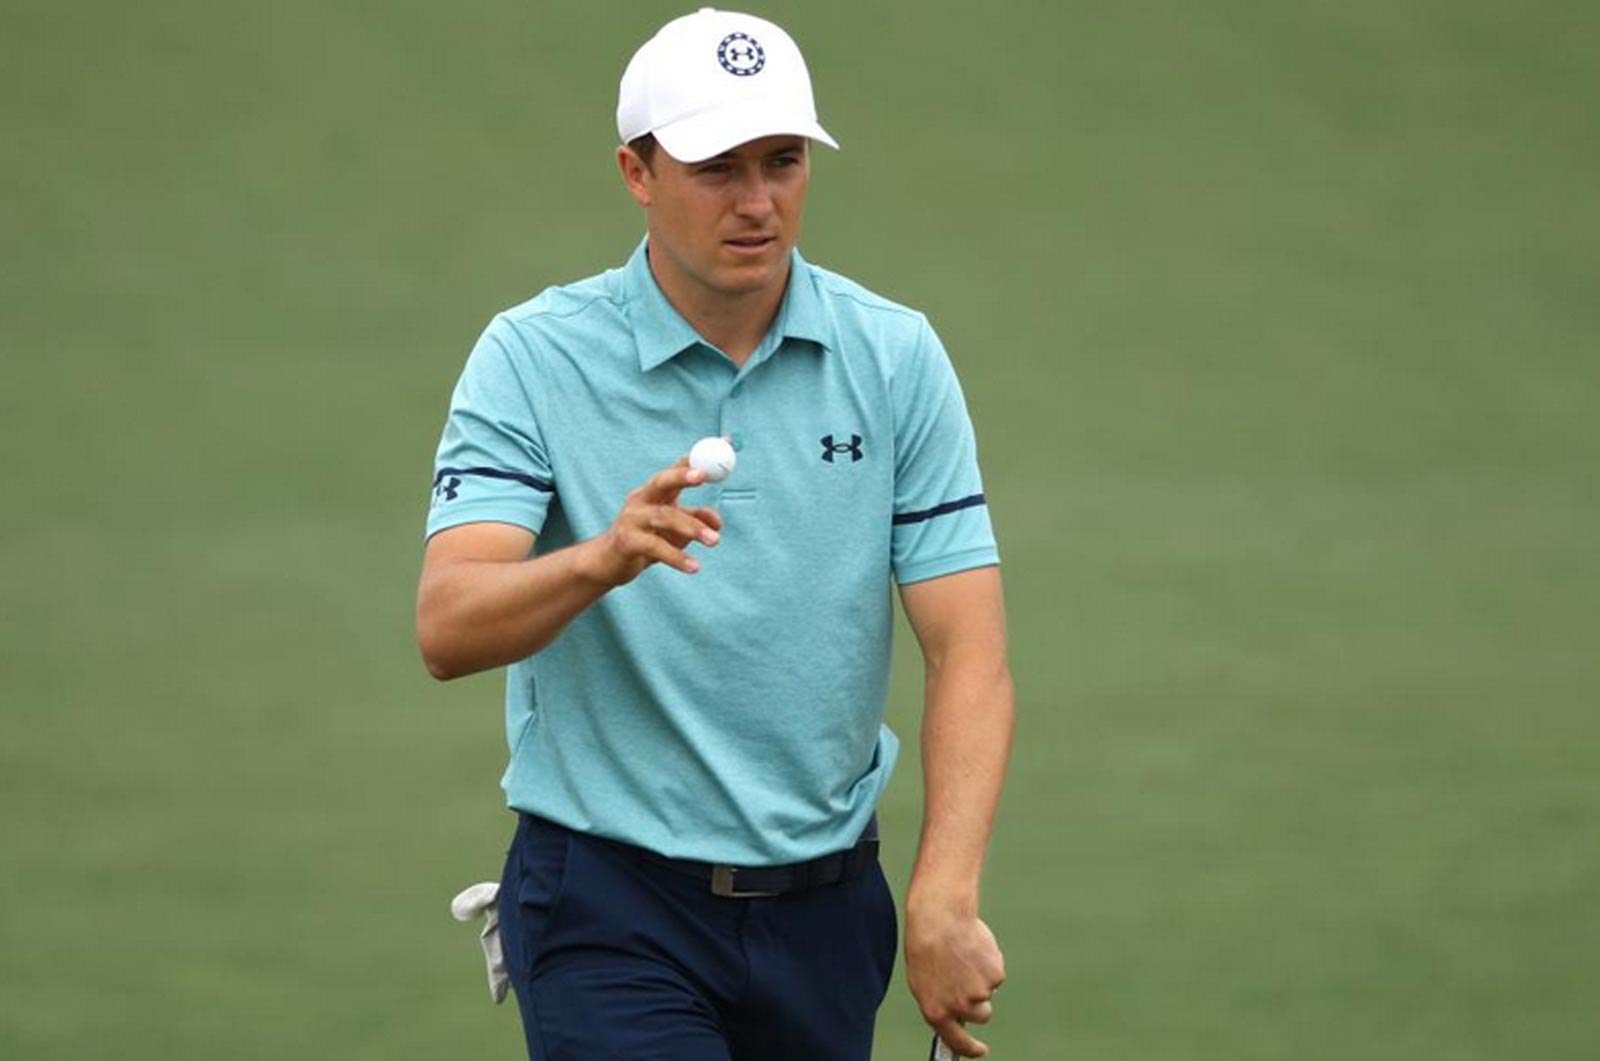 Jordan Spieth says he contracted COVID19, has fully recovered